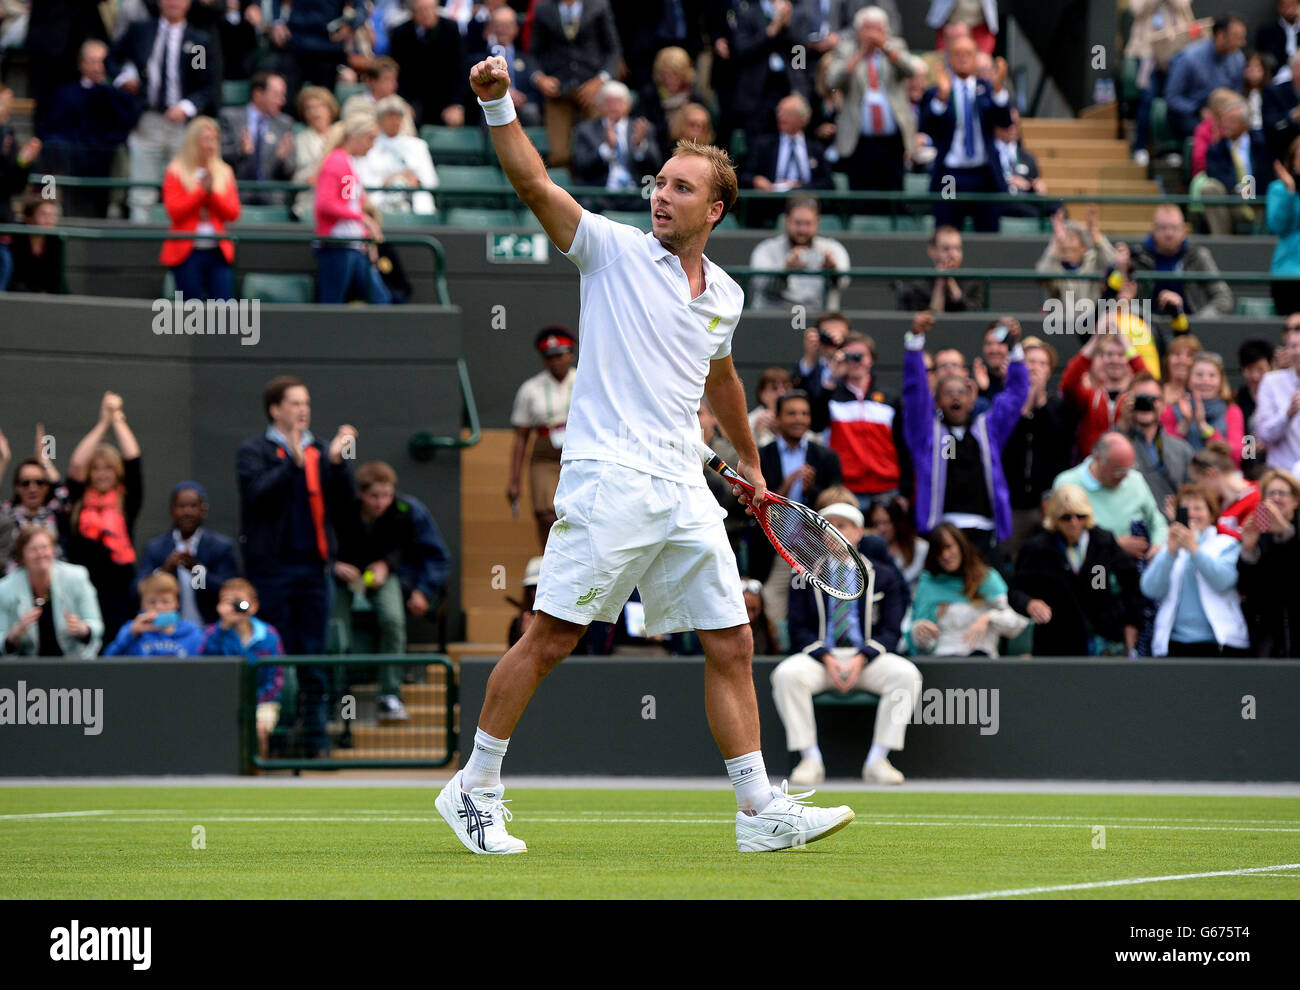 Belgium's Steve Darcis acknowledges the crowd after beating Spain's Rafael Nadal during day one of the Wimbledon Championships at The All England Lawn Tennis and Croquet Club, Wimbledon. Stock Photo